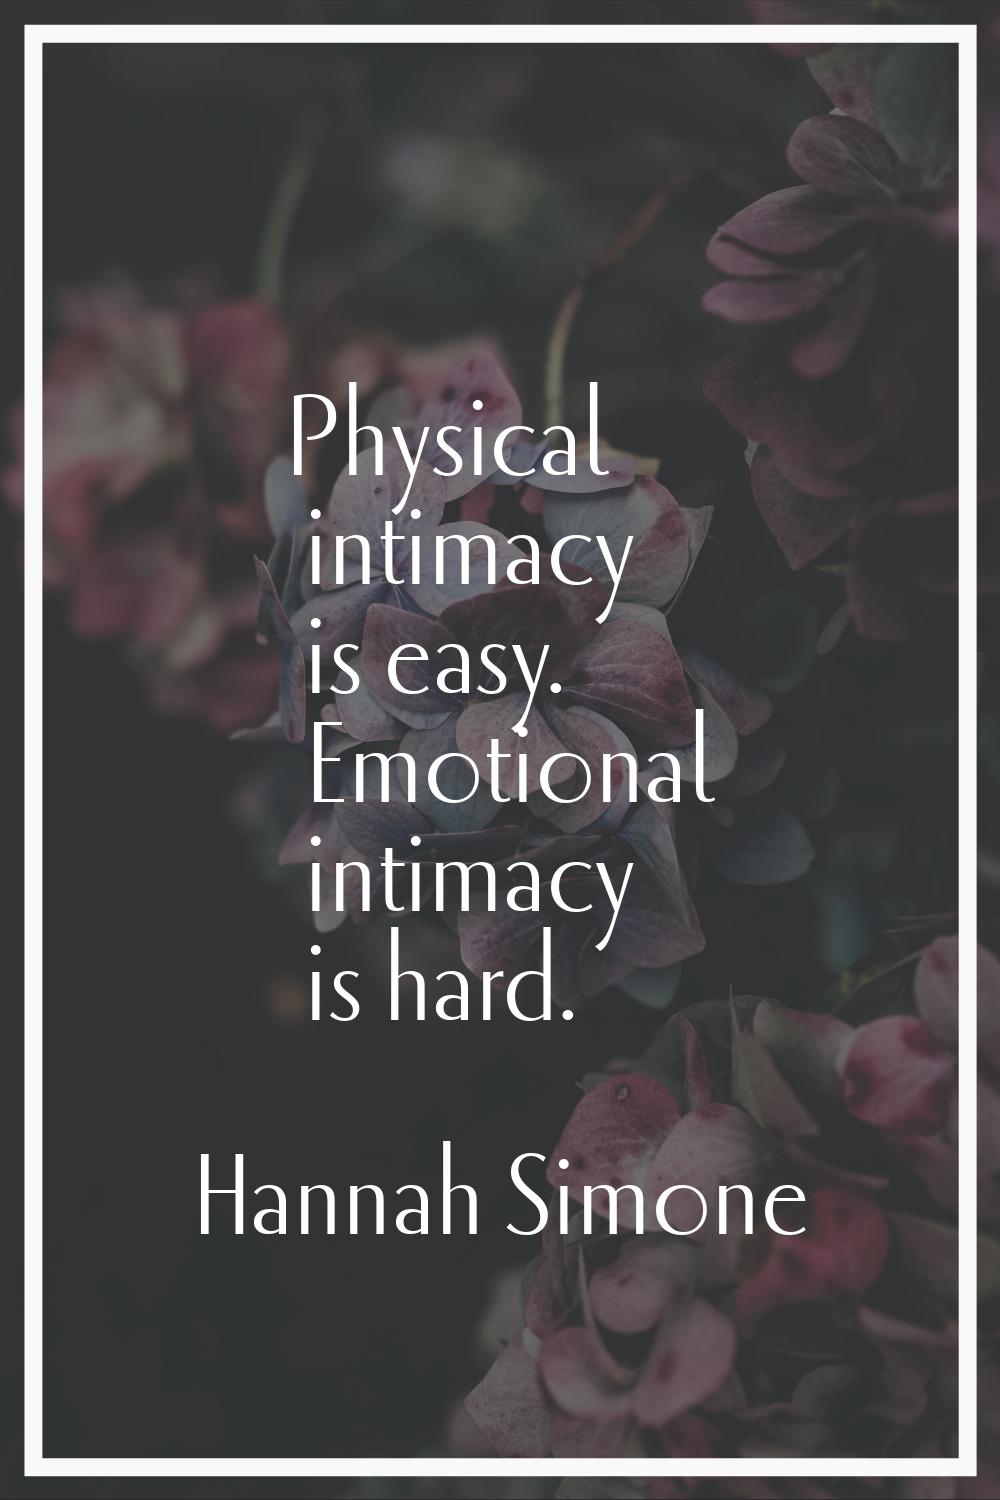 Physical intimacy is easy. Emotional intimacy is hard.